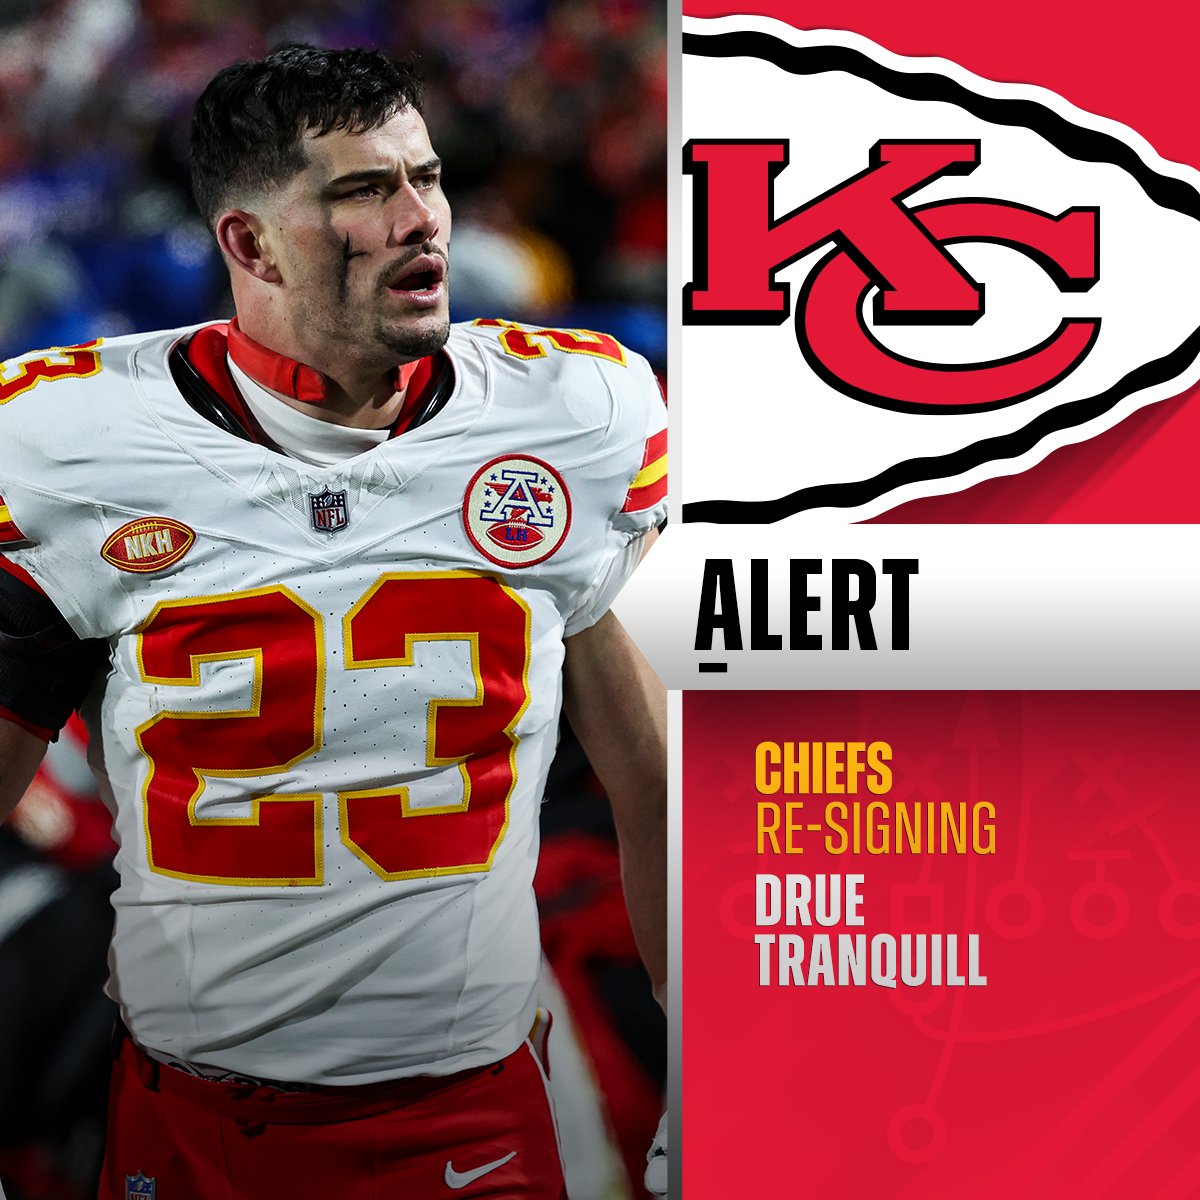 Chiefs re-signing LB Drue Tranquill to 3-year, $19M deal with $13M guaranteed. (via @RapSheet)